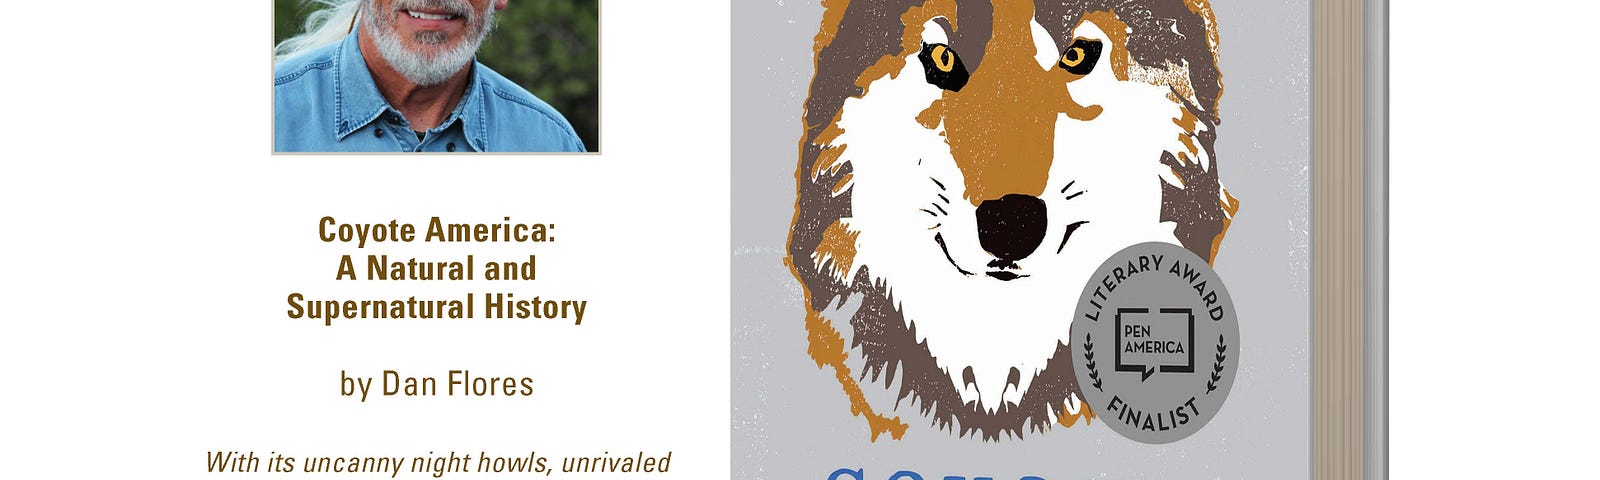 Poster for America’s Wild Read July 2021 with head and shoulders image of author and image of book cover for Coyote America: A Natural and Supernatural History.